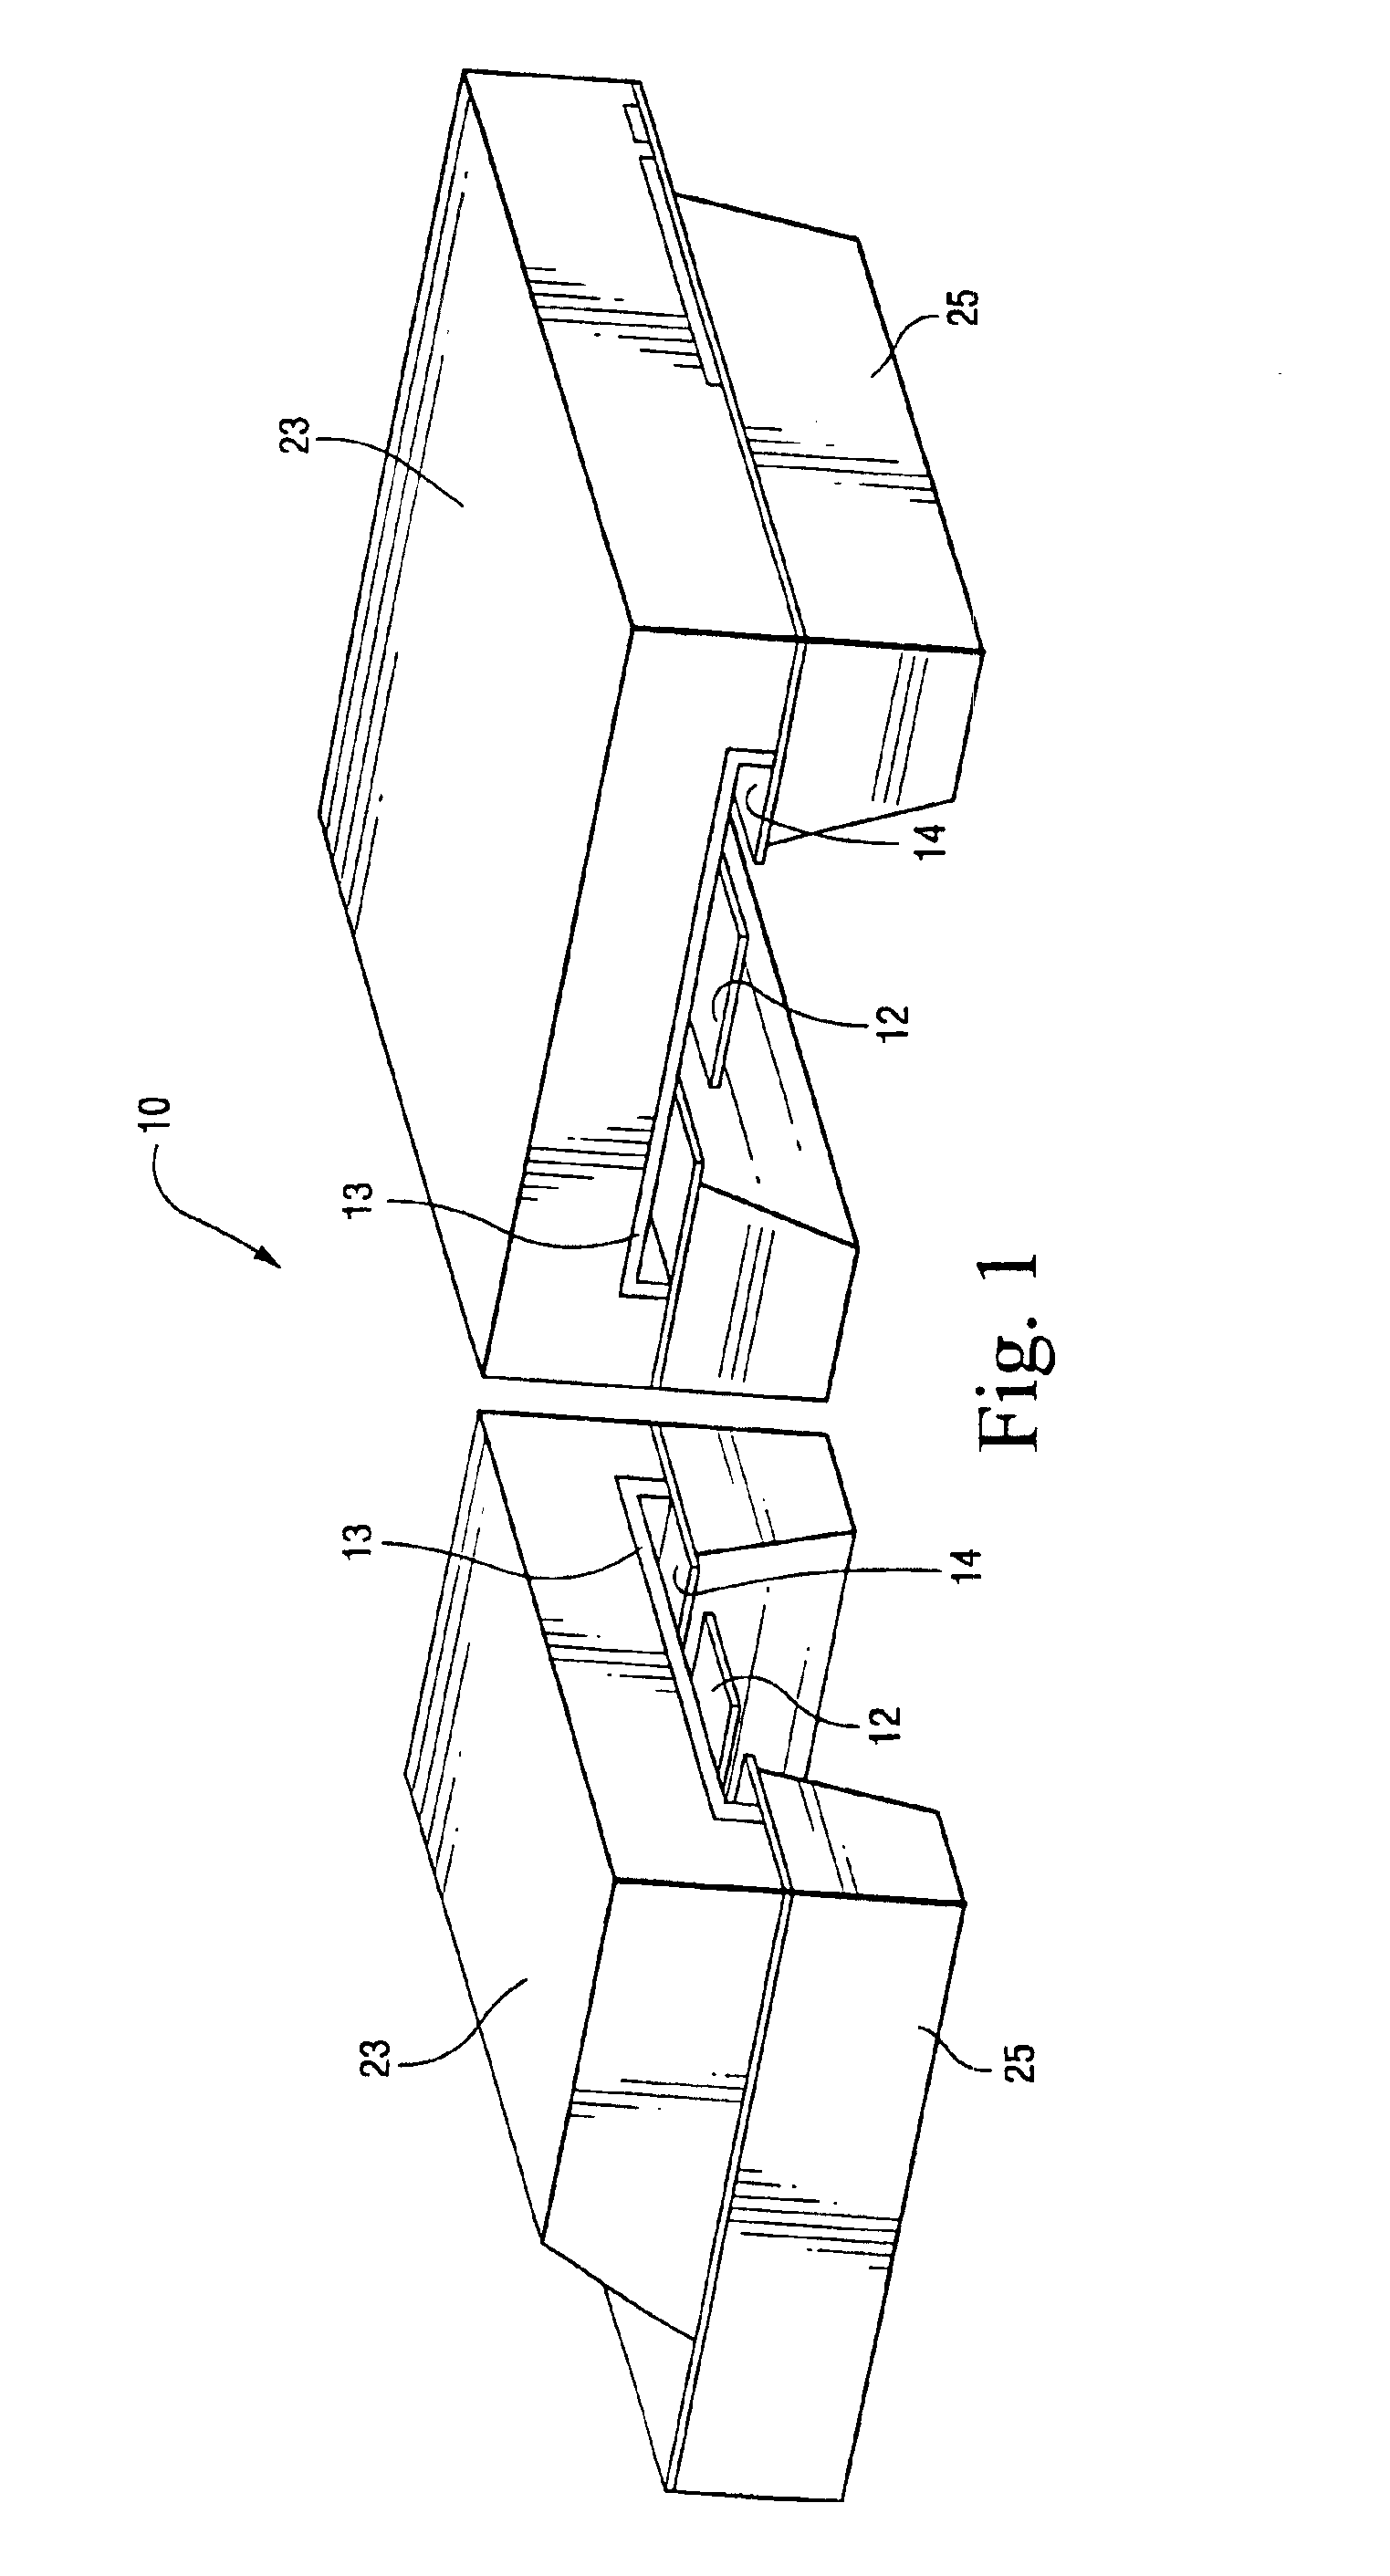 Method of making an integrated electromechanical switch and tunable capacitor